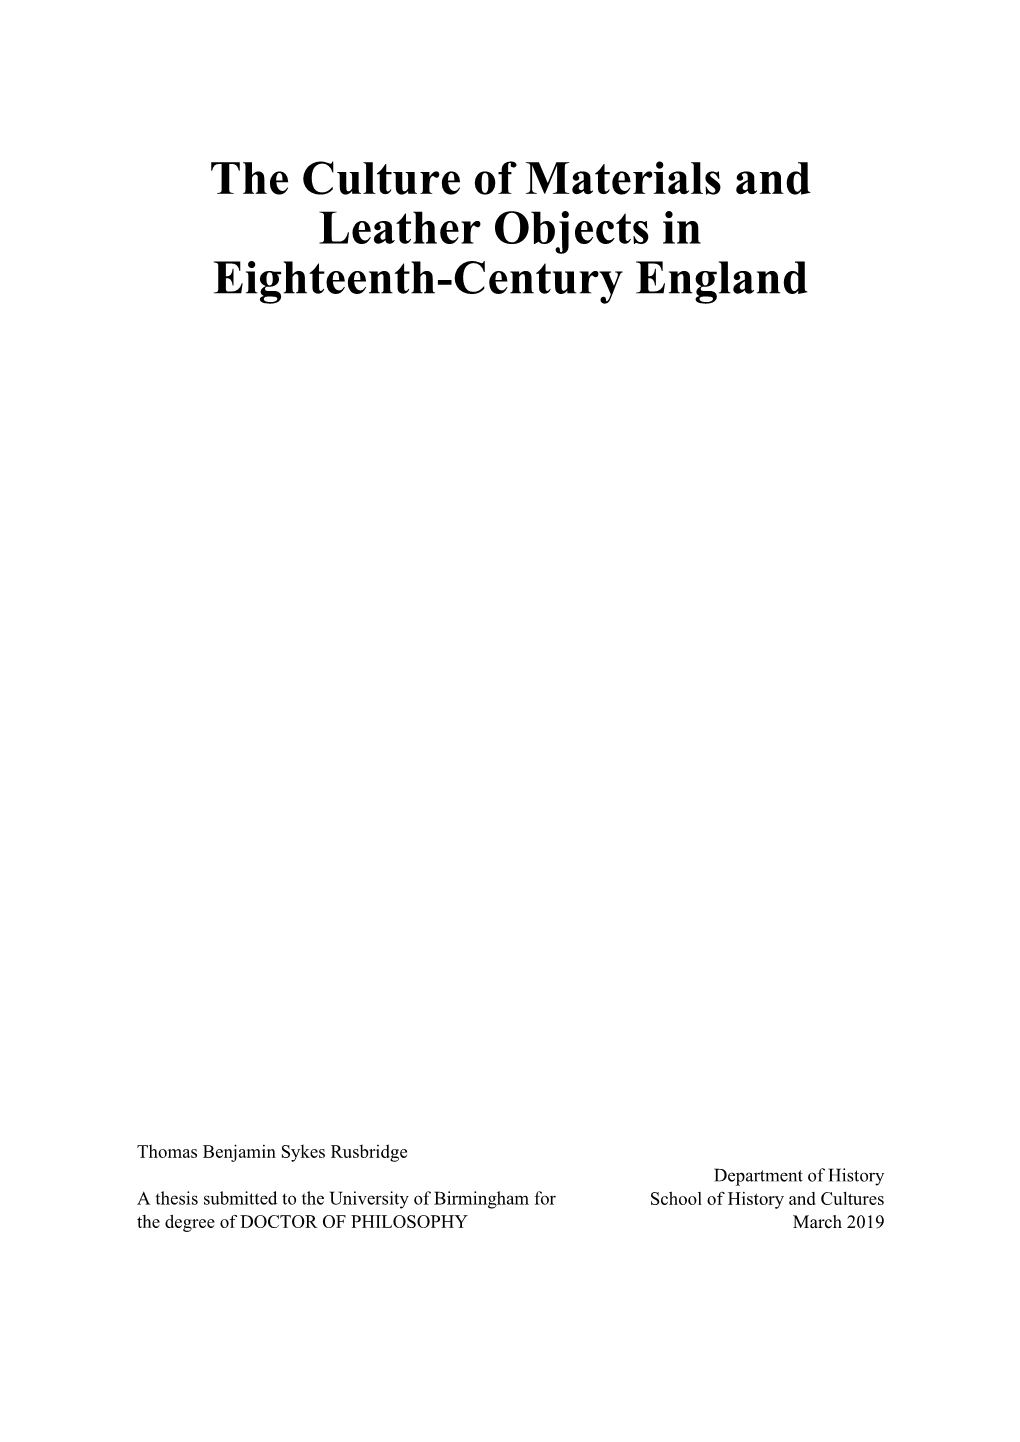 The Culture of Materials and Leather Objects in Eighteenth-Century England